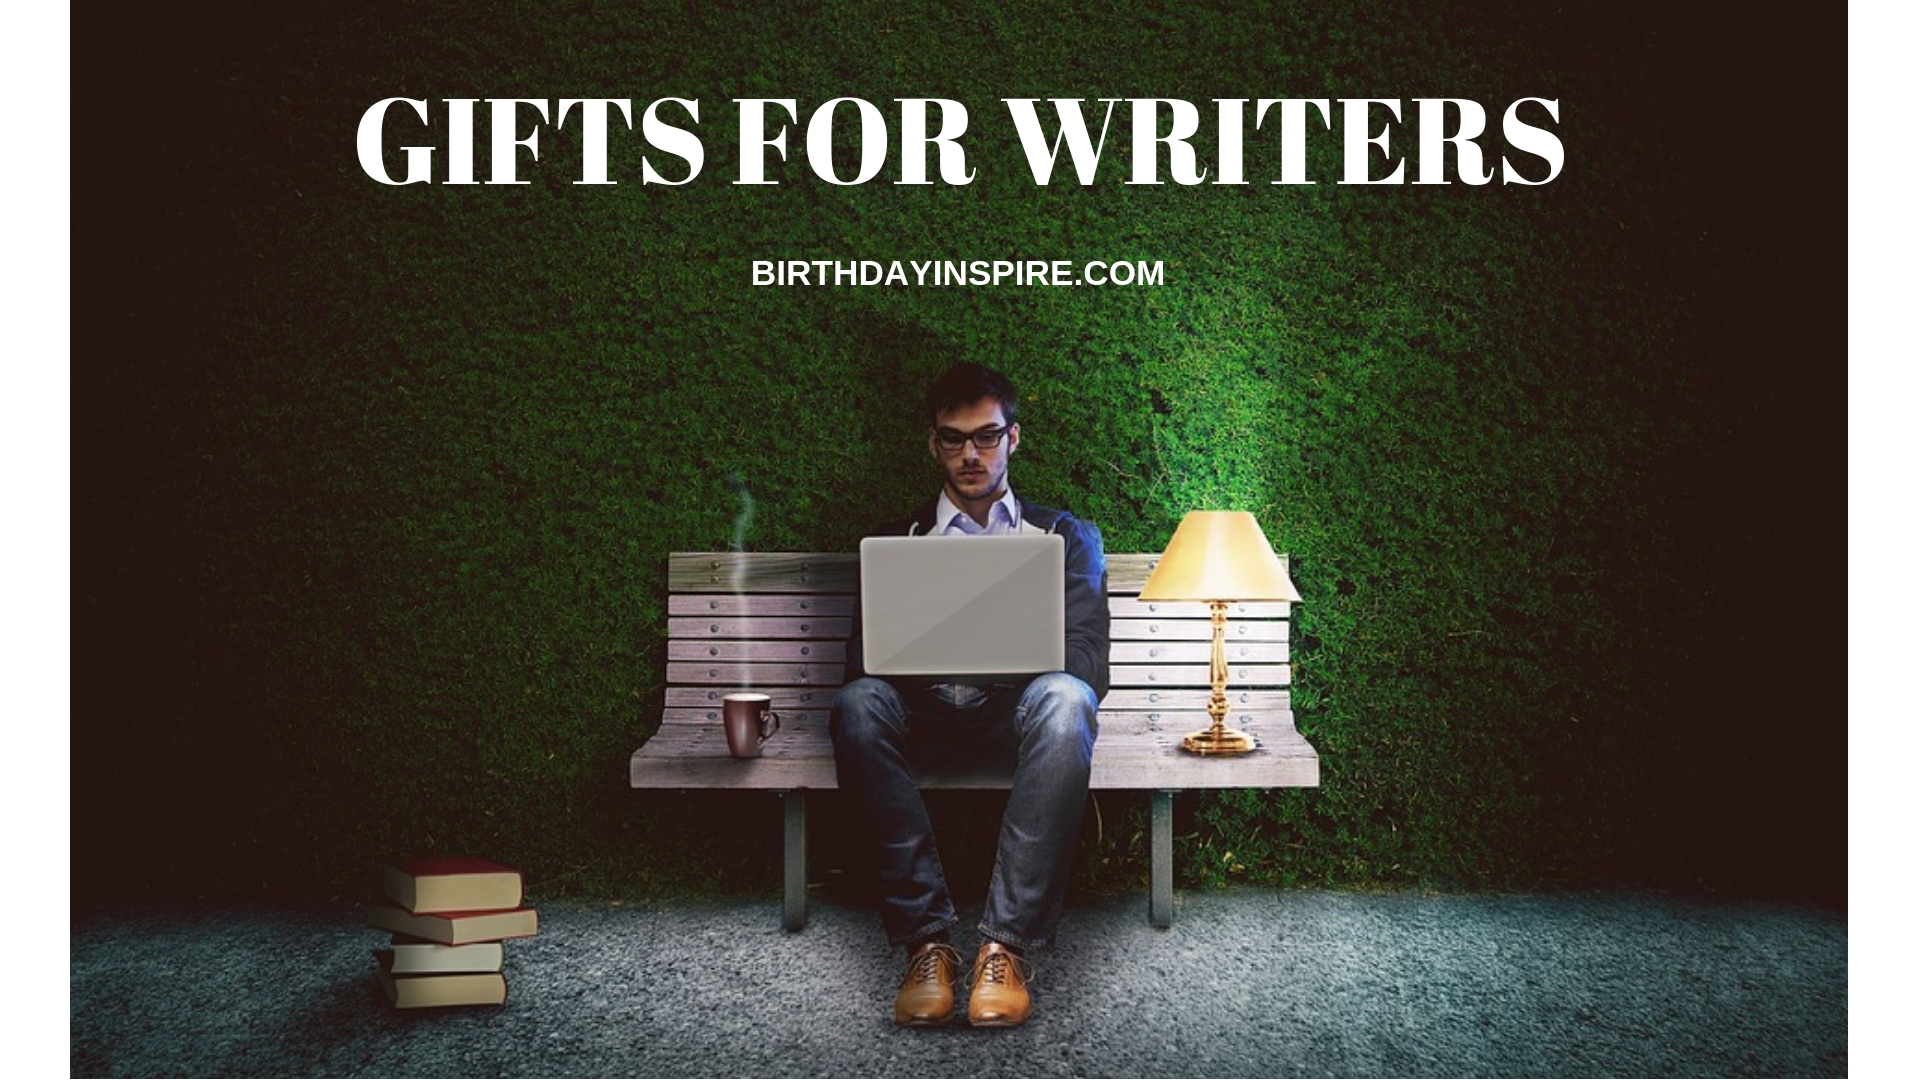 GIFTS FOR WRITERS